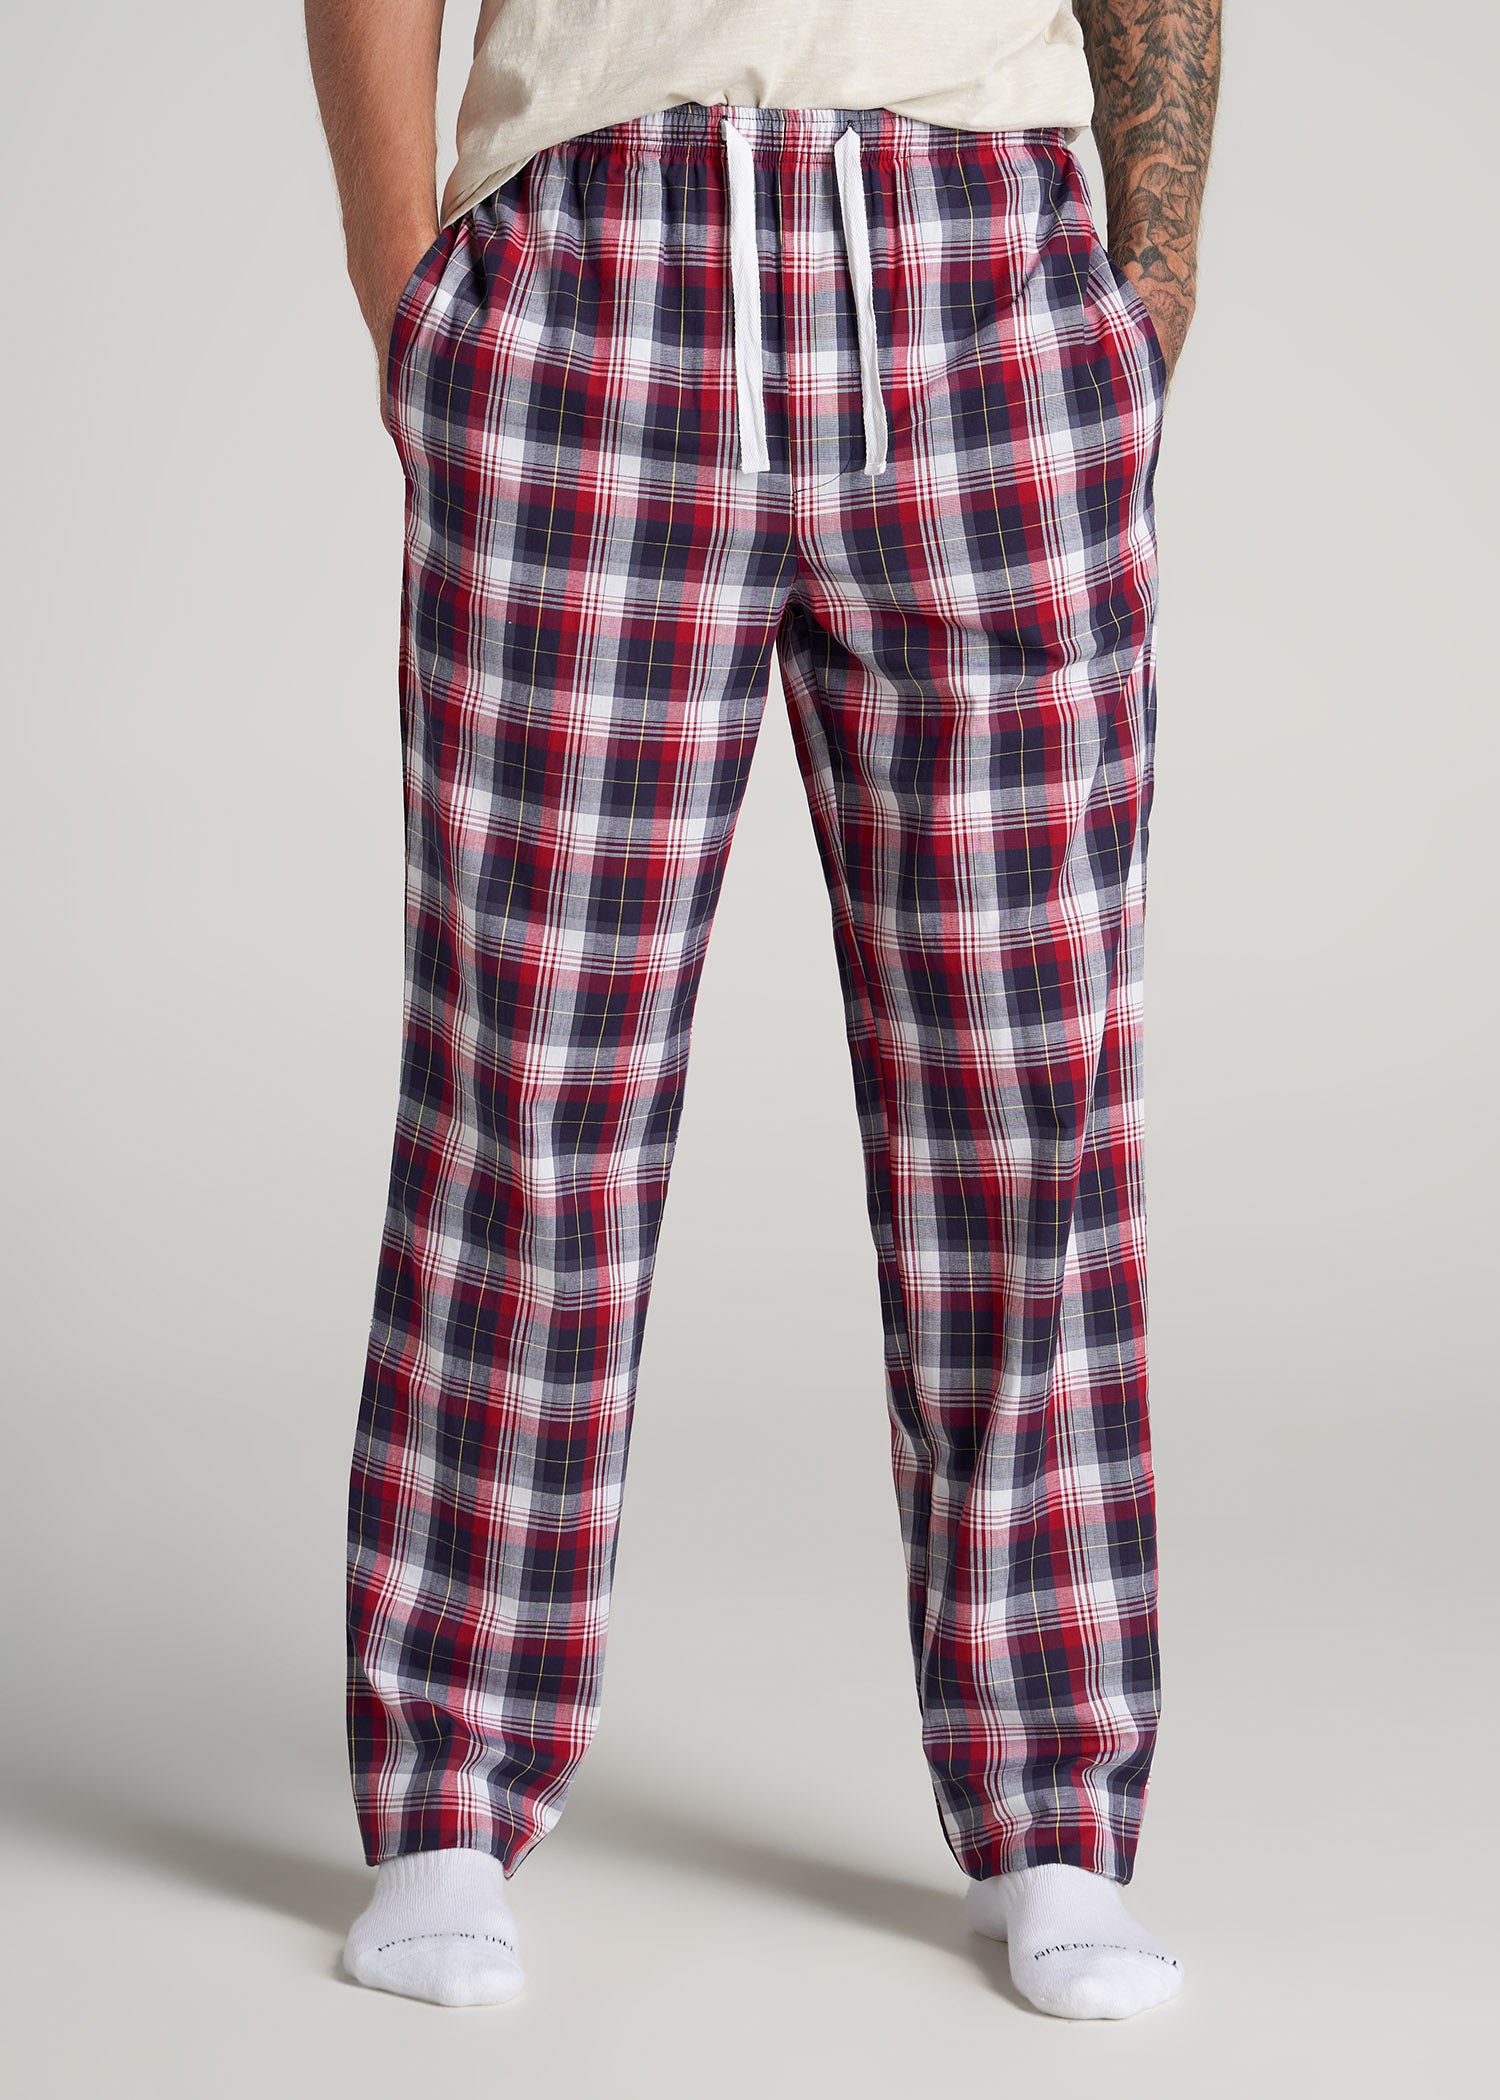 Woven Pajama Pants for Tall Men in Dark Blue & Red Plaid